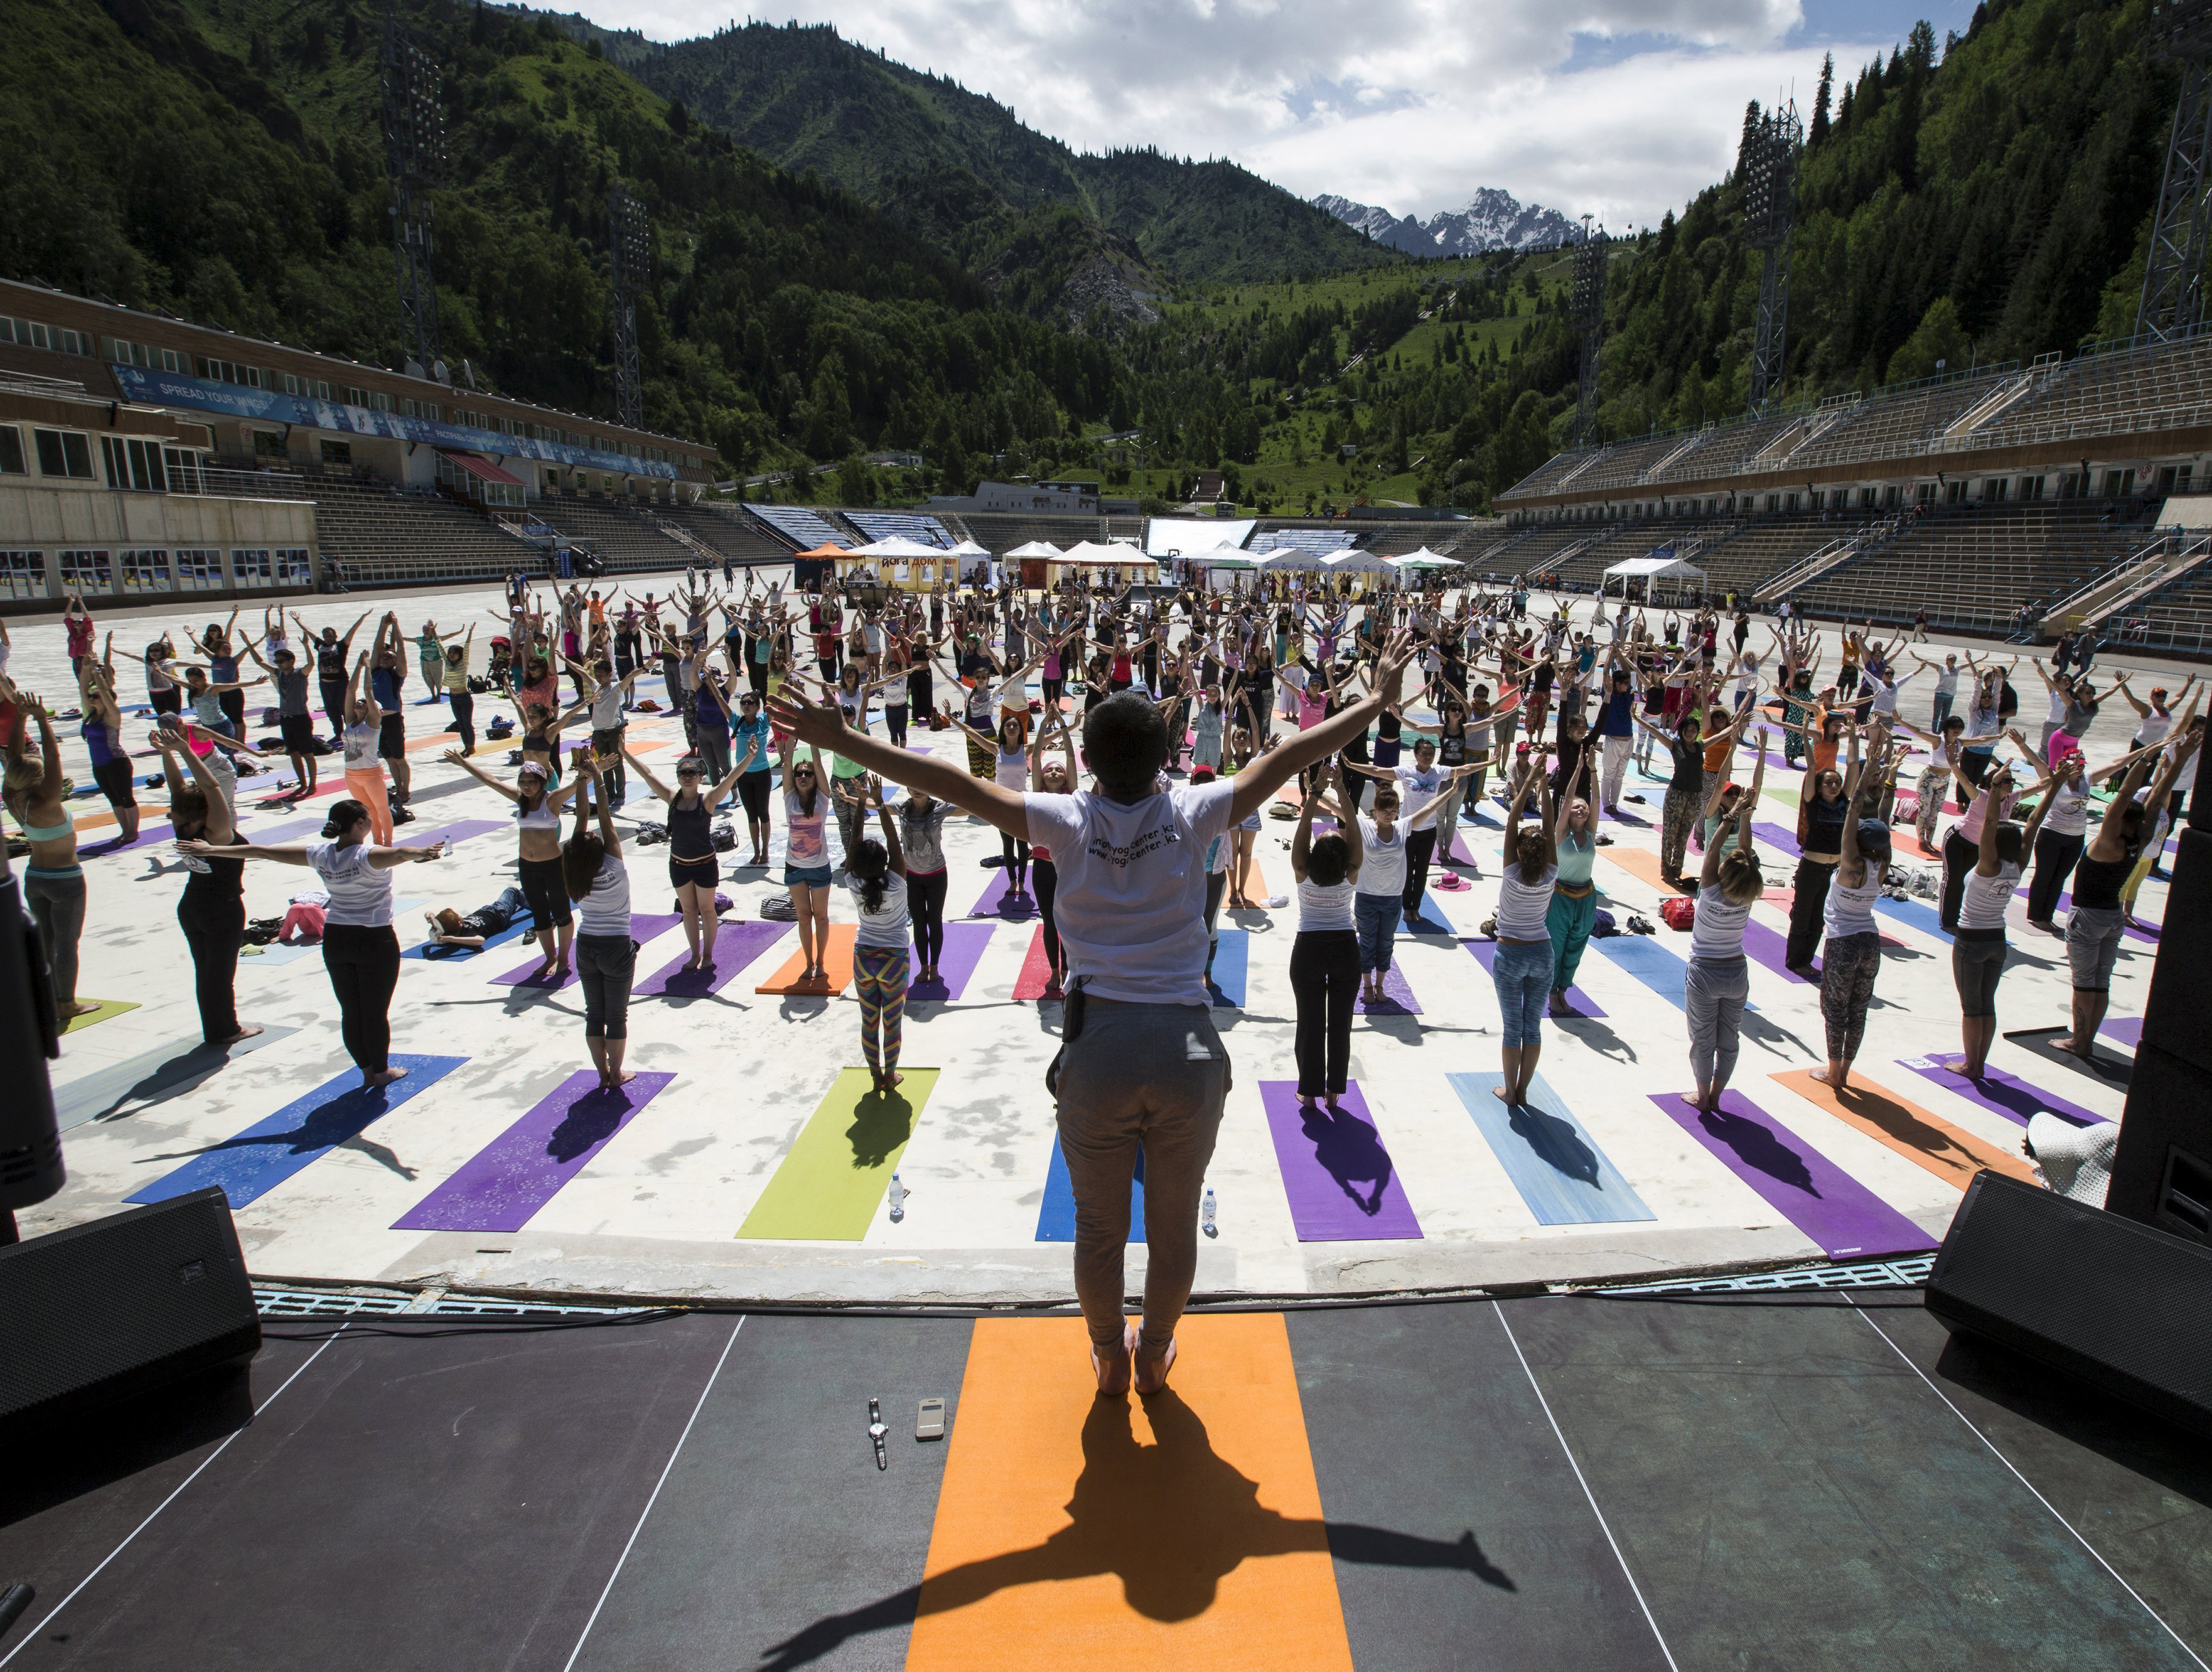 Participants attend the Yoga Fest to mark the International Day of Yoga at the Medeo skating rink in Almaty, Kazakhstan, on June 21, 2015.